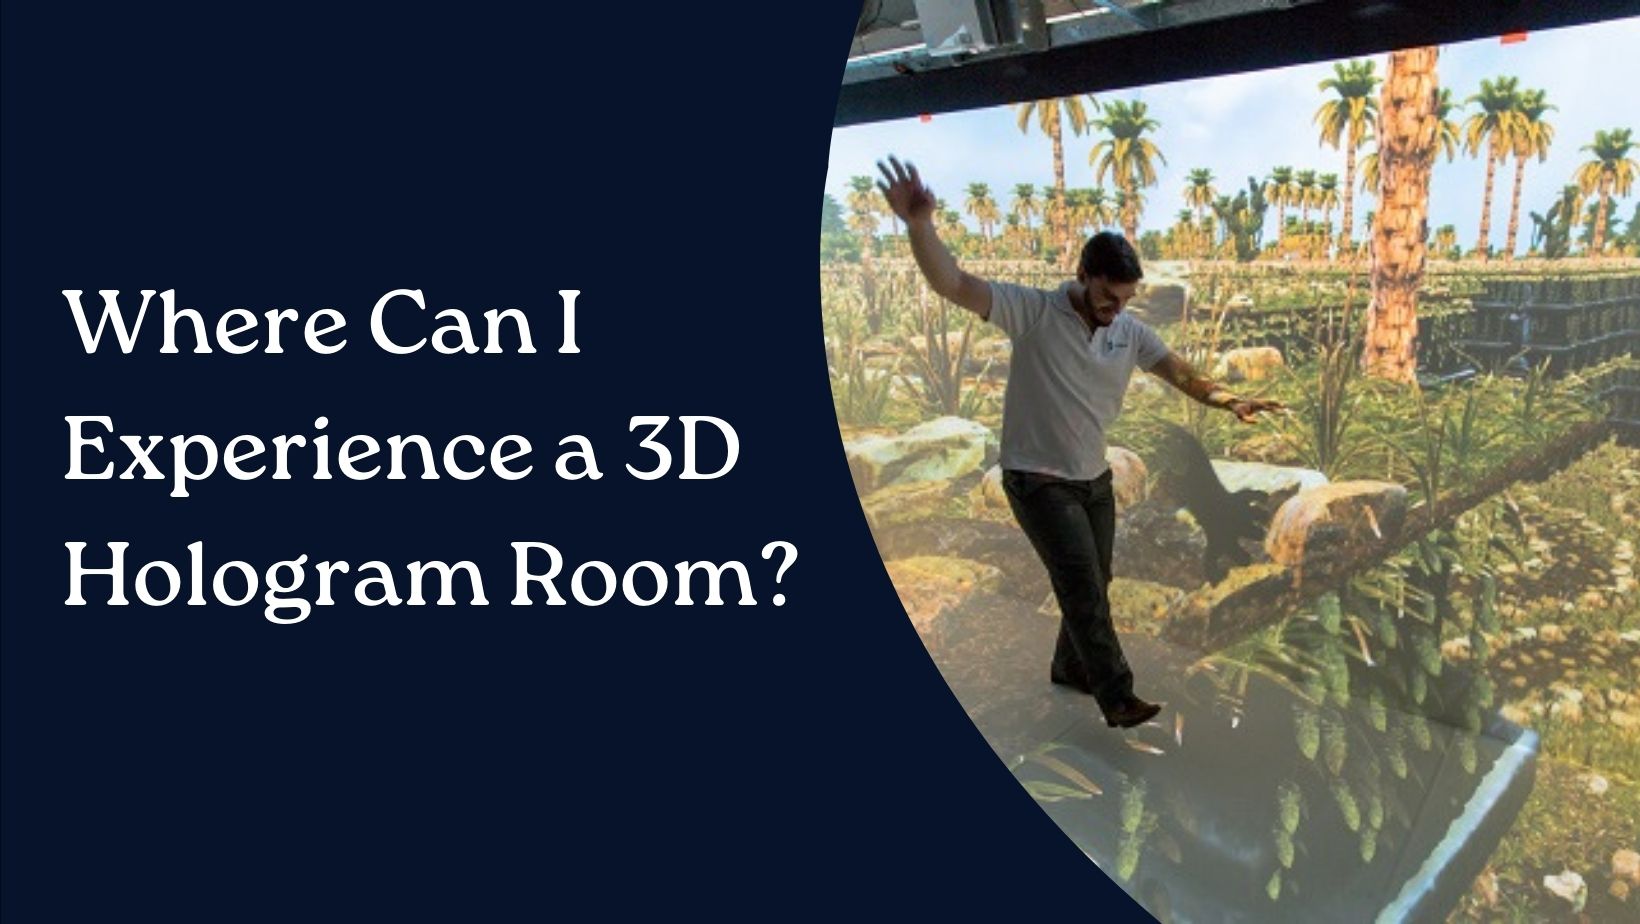 Where Can I Experience a 3D Hologram Room?